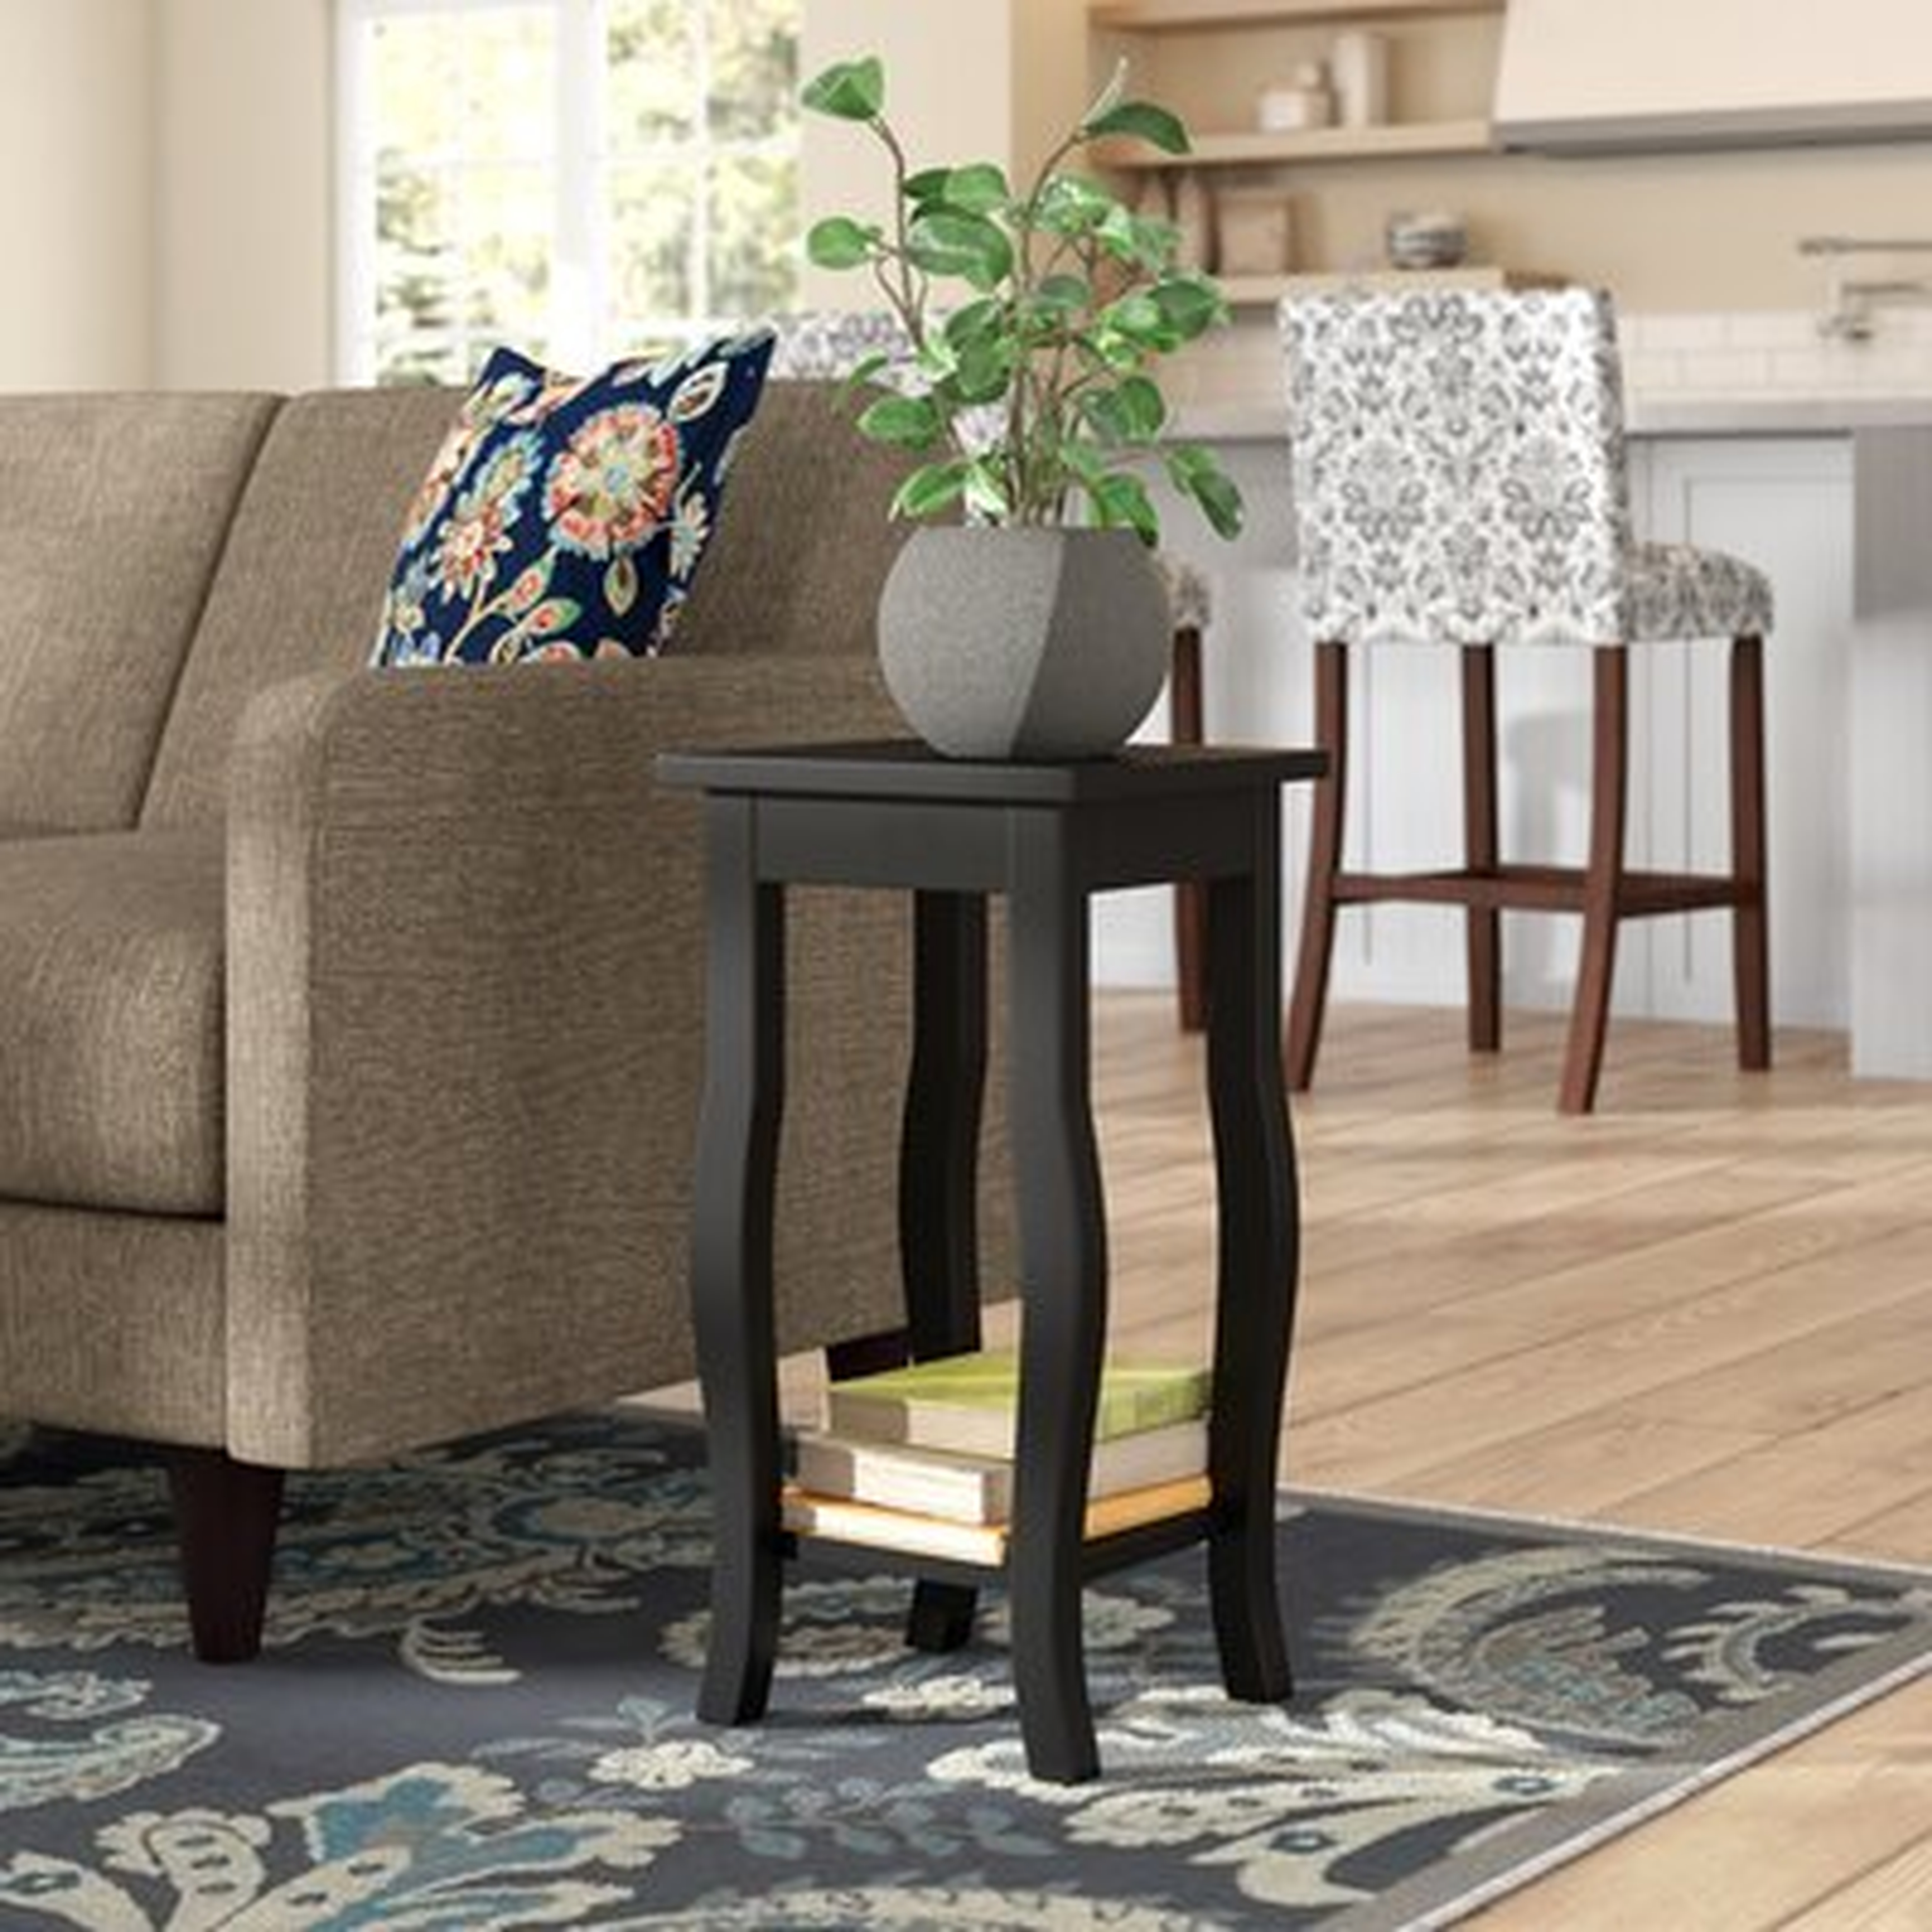 Danby End Table with Storage - Wayfair